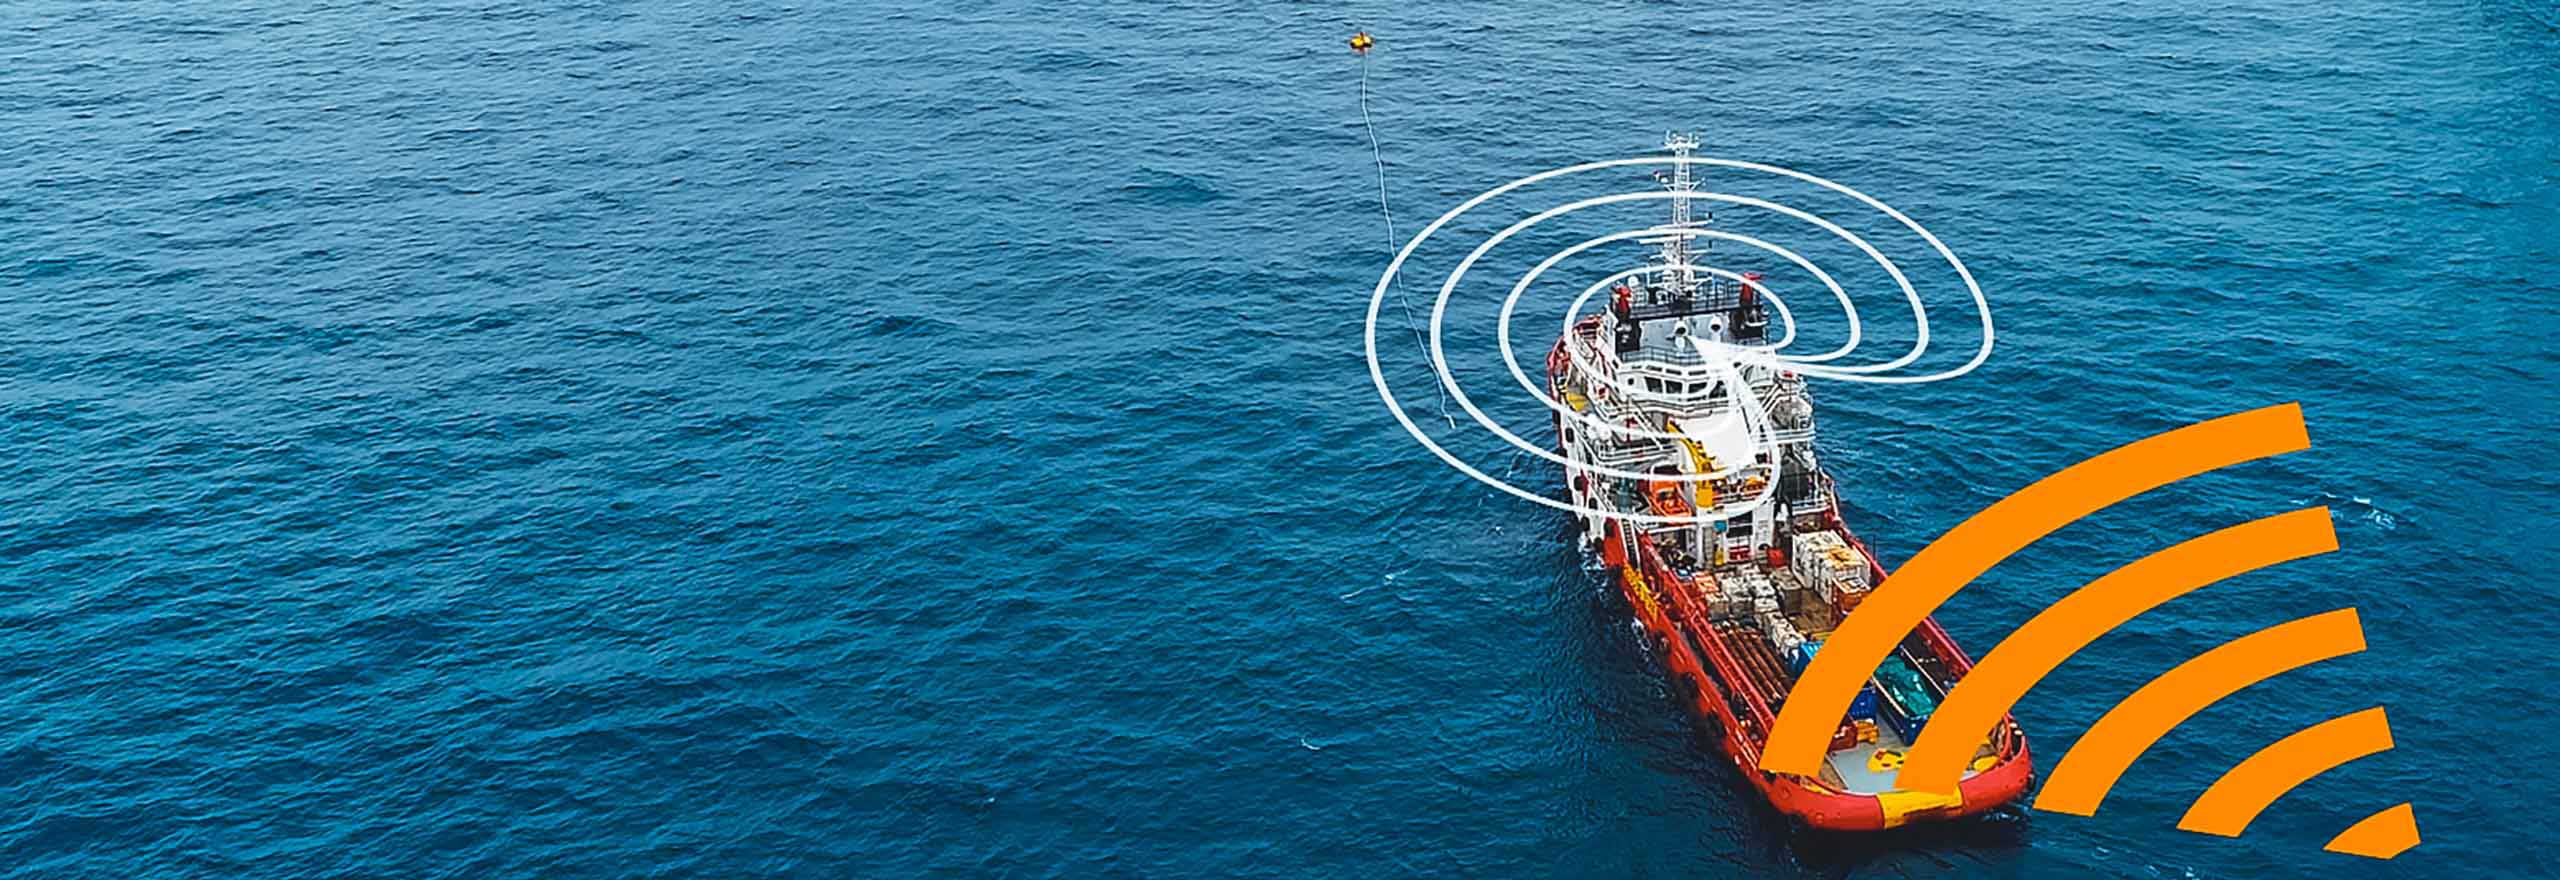 How anti-jam technology reacts and mitigates jamming on a red and white vessel in the middle of the ocean near an offshore oil rig.